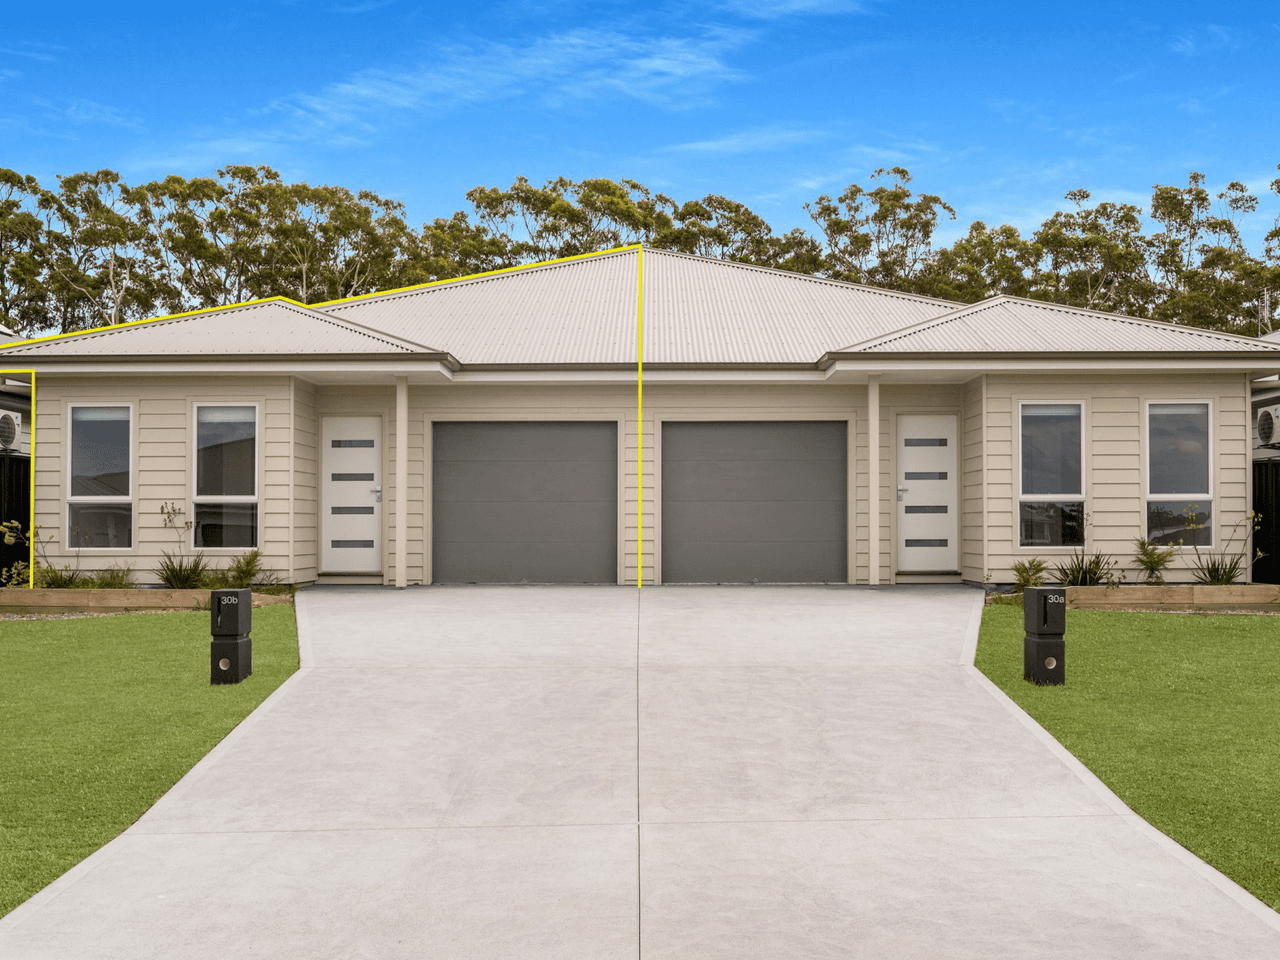 30B Lancing Avenue, SUSSEX INLET, NSW 2540